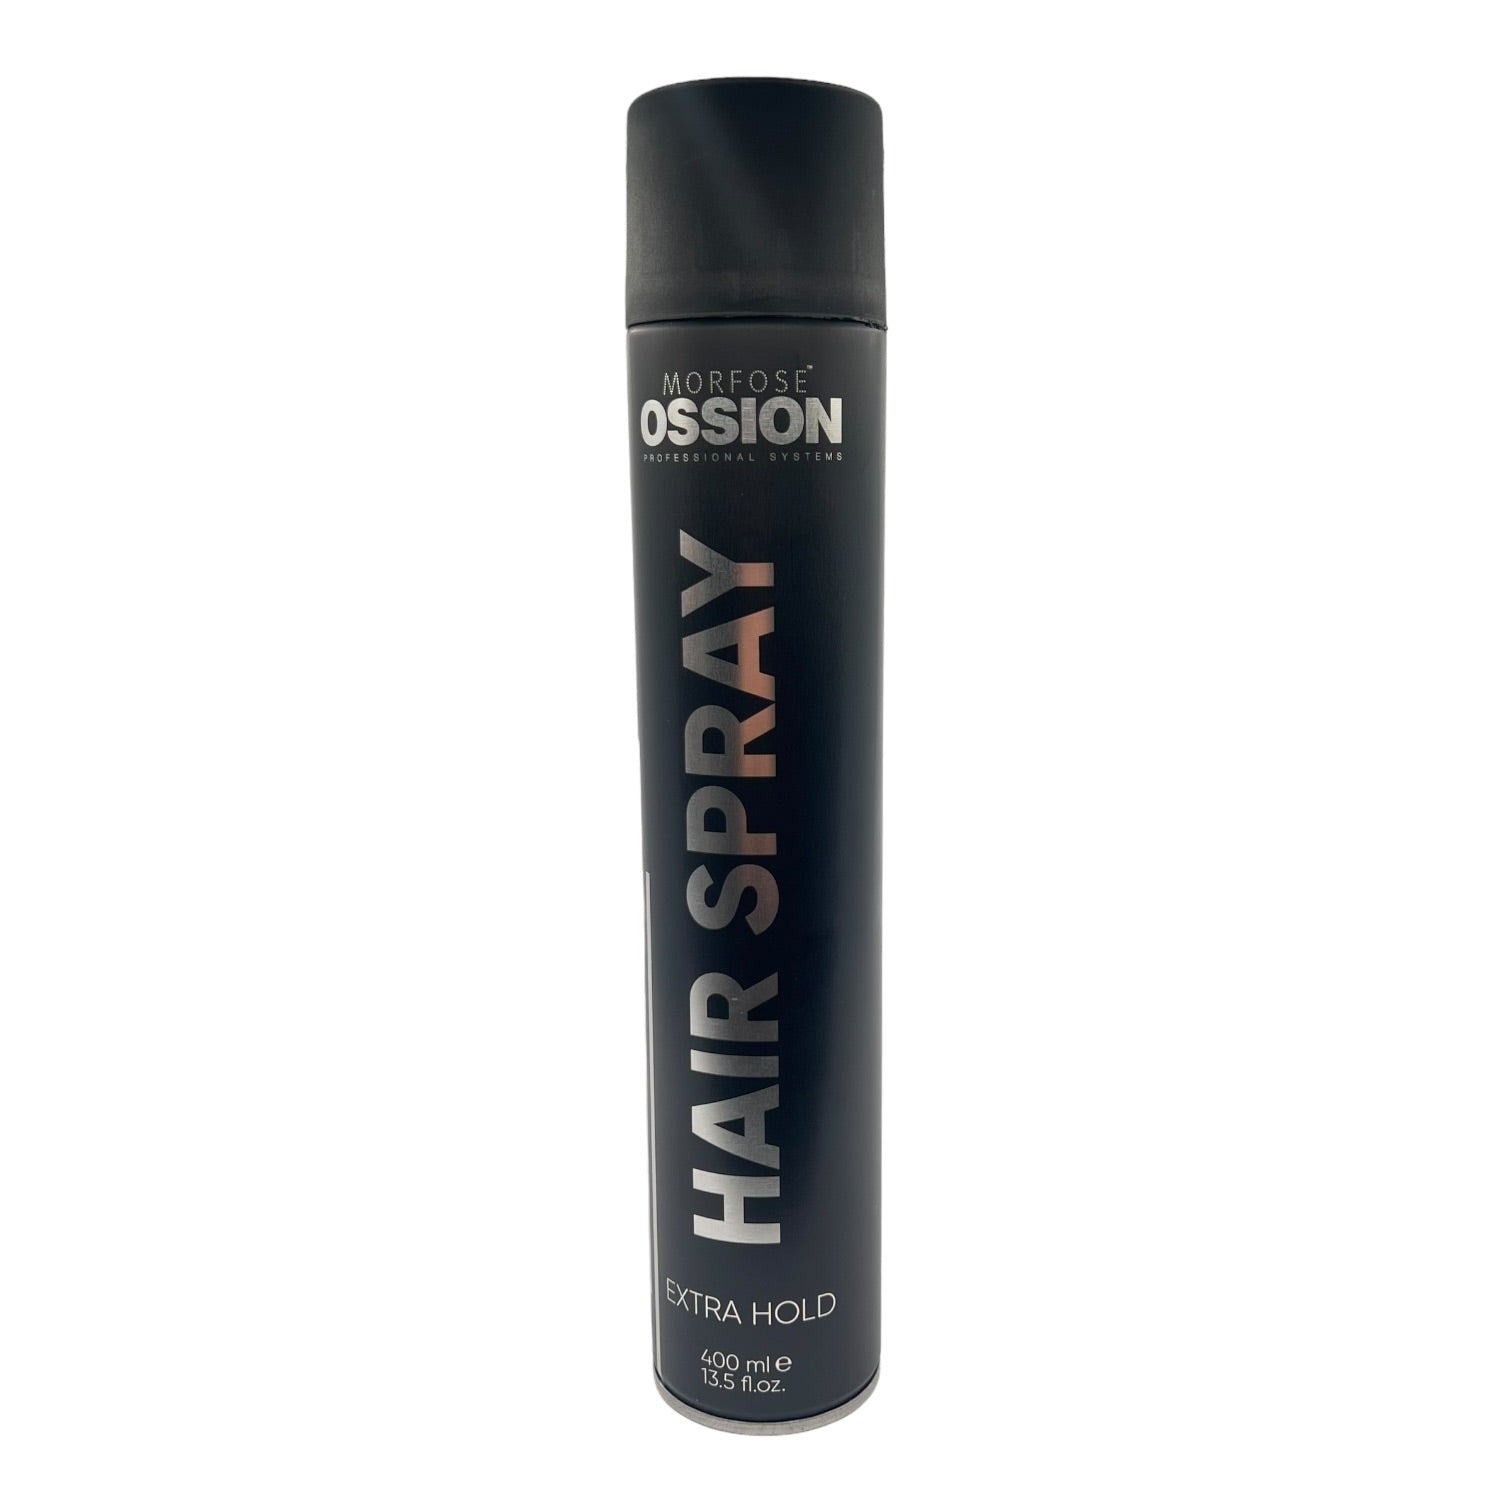 Morfose - Ossion Extra Hold Hair Spray 400ml